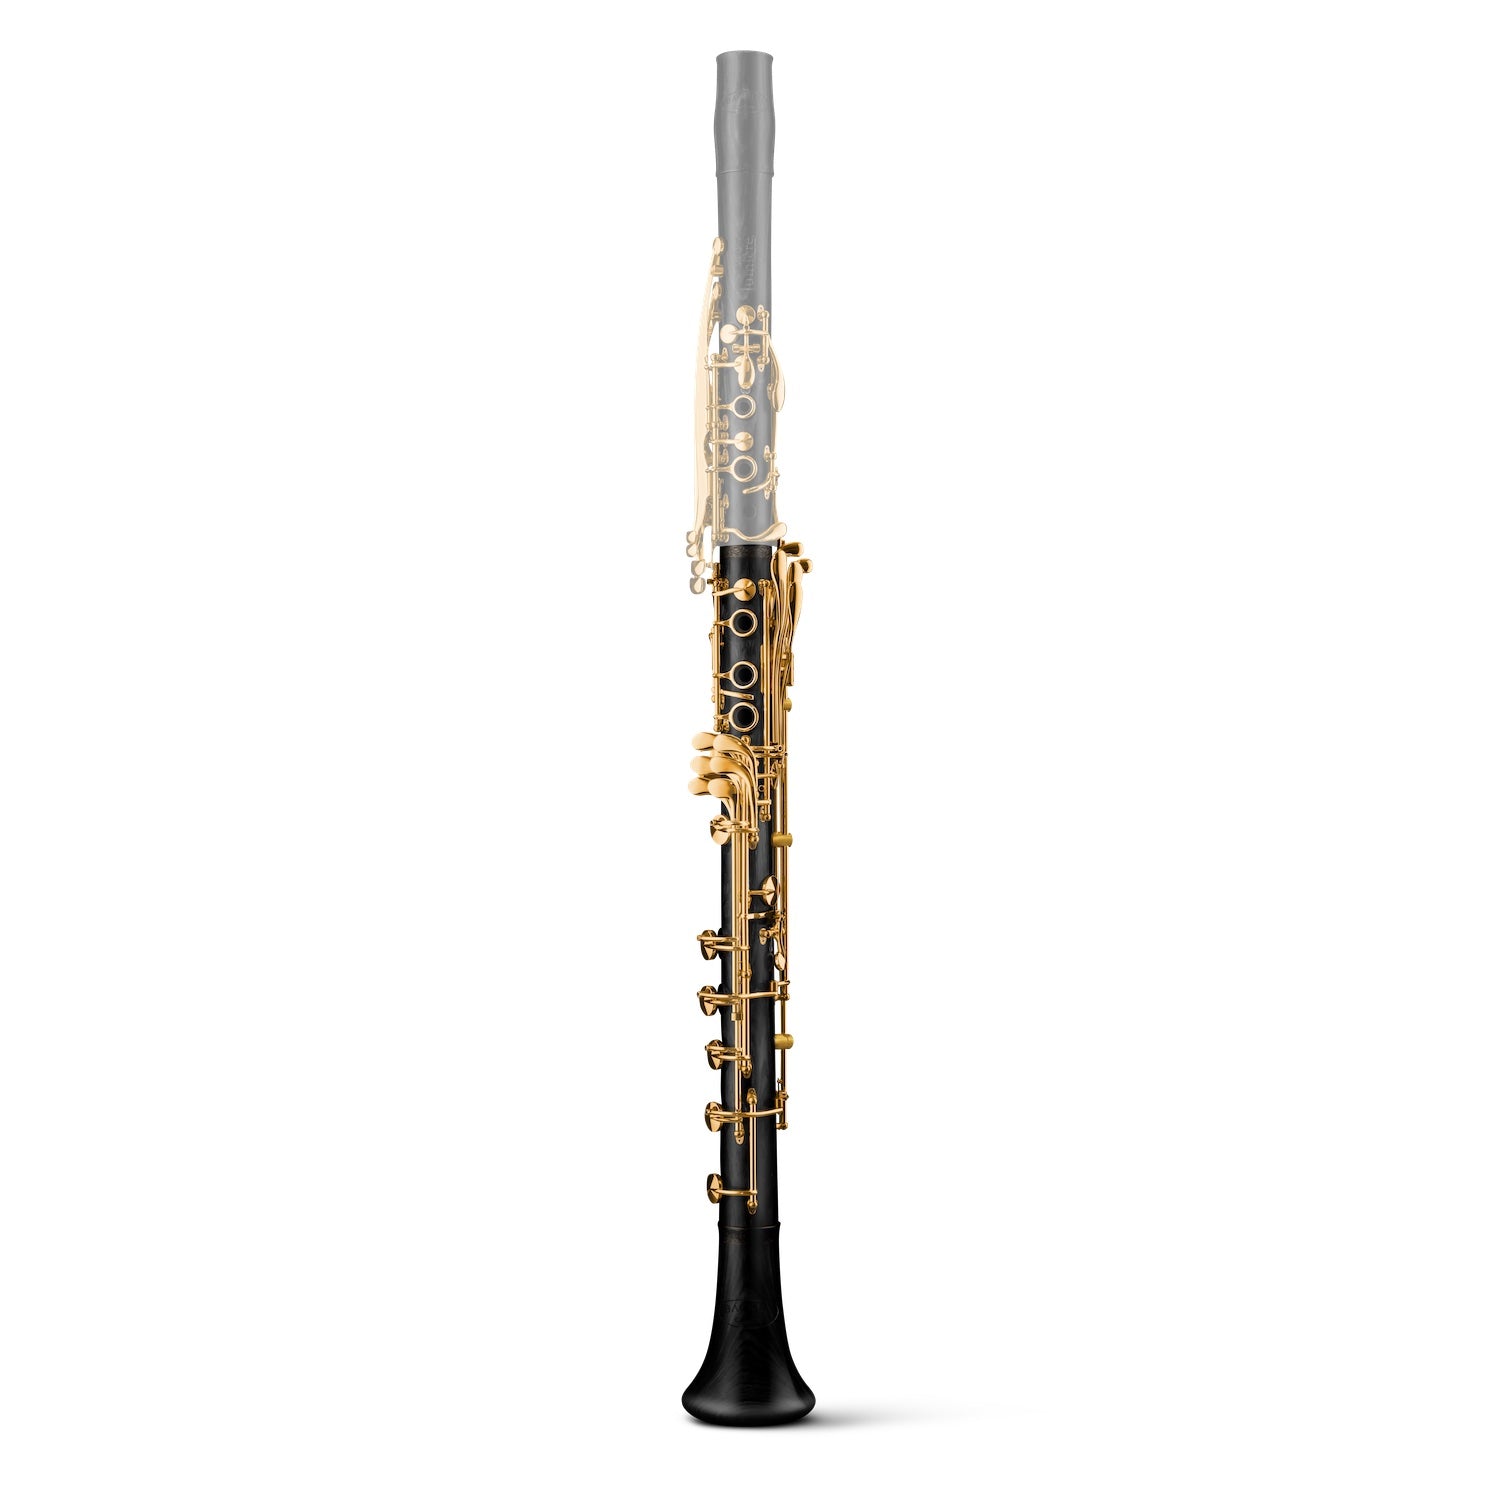 backun-lumiere-a-basset-clarinet-lower-joint-grenadilla-gold-front